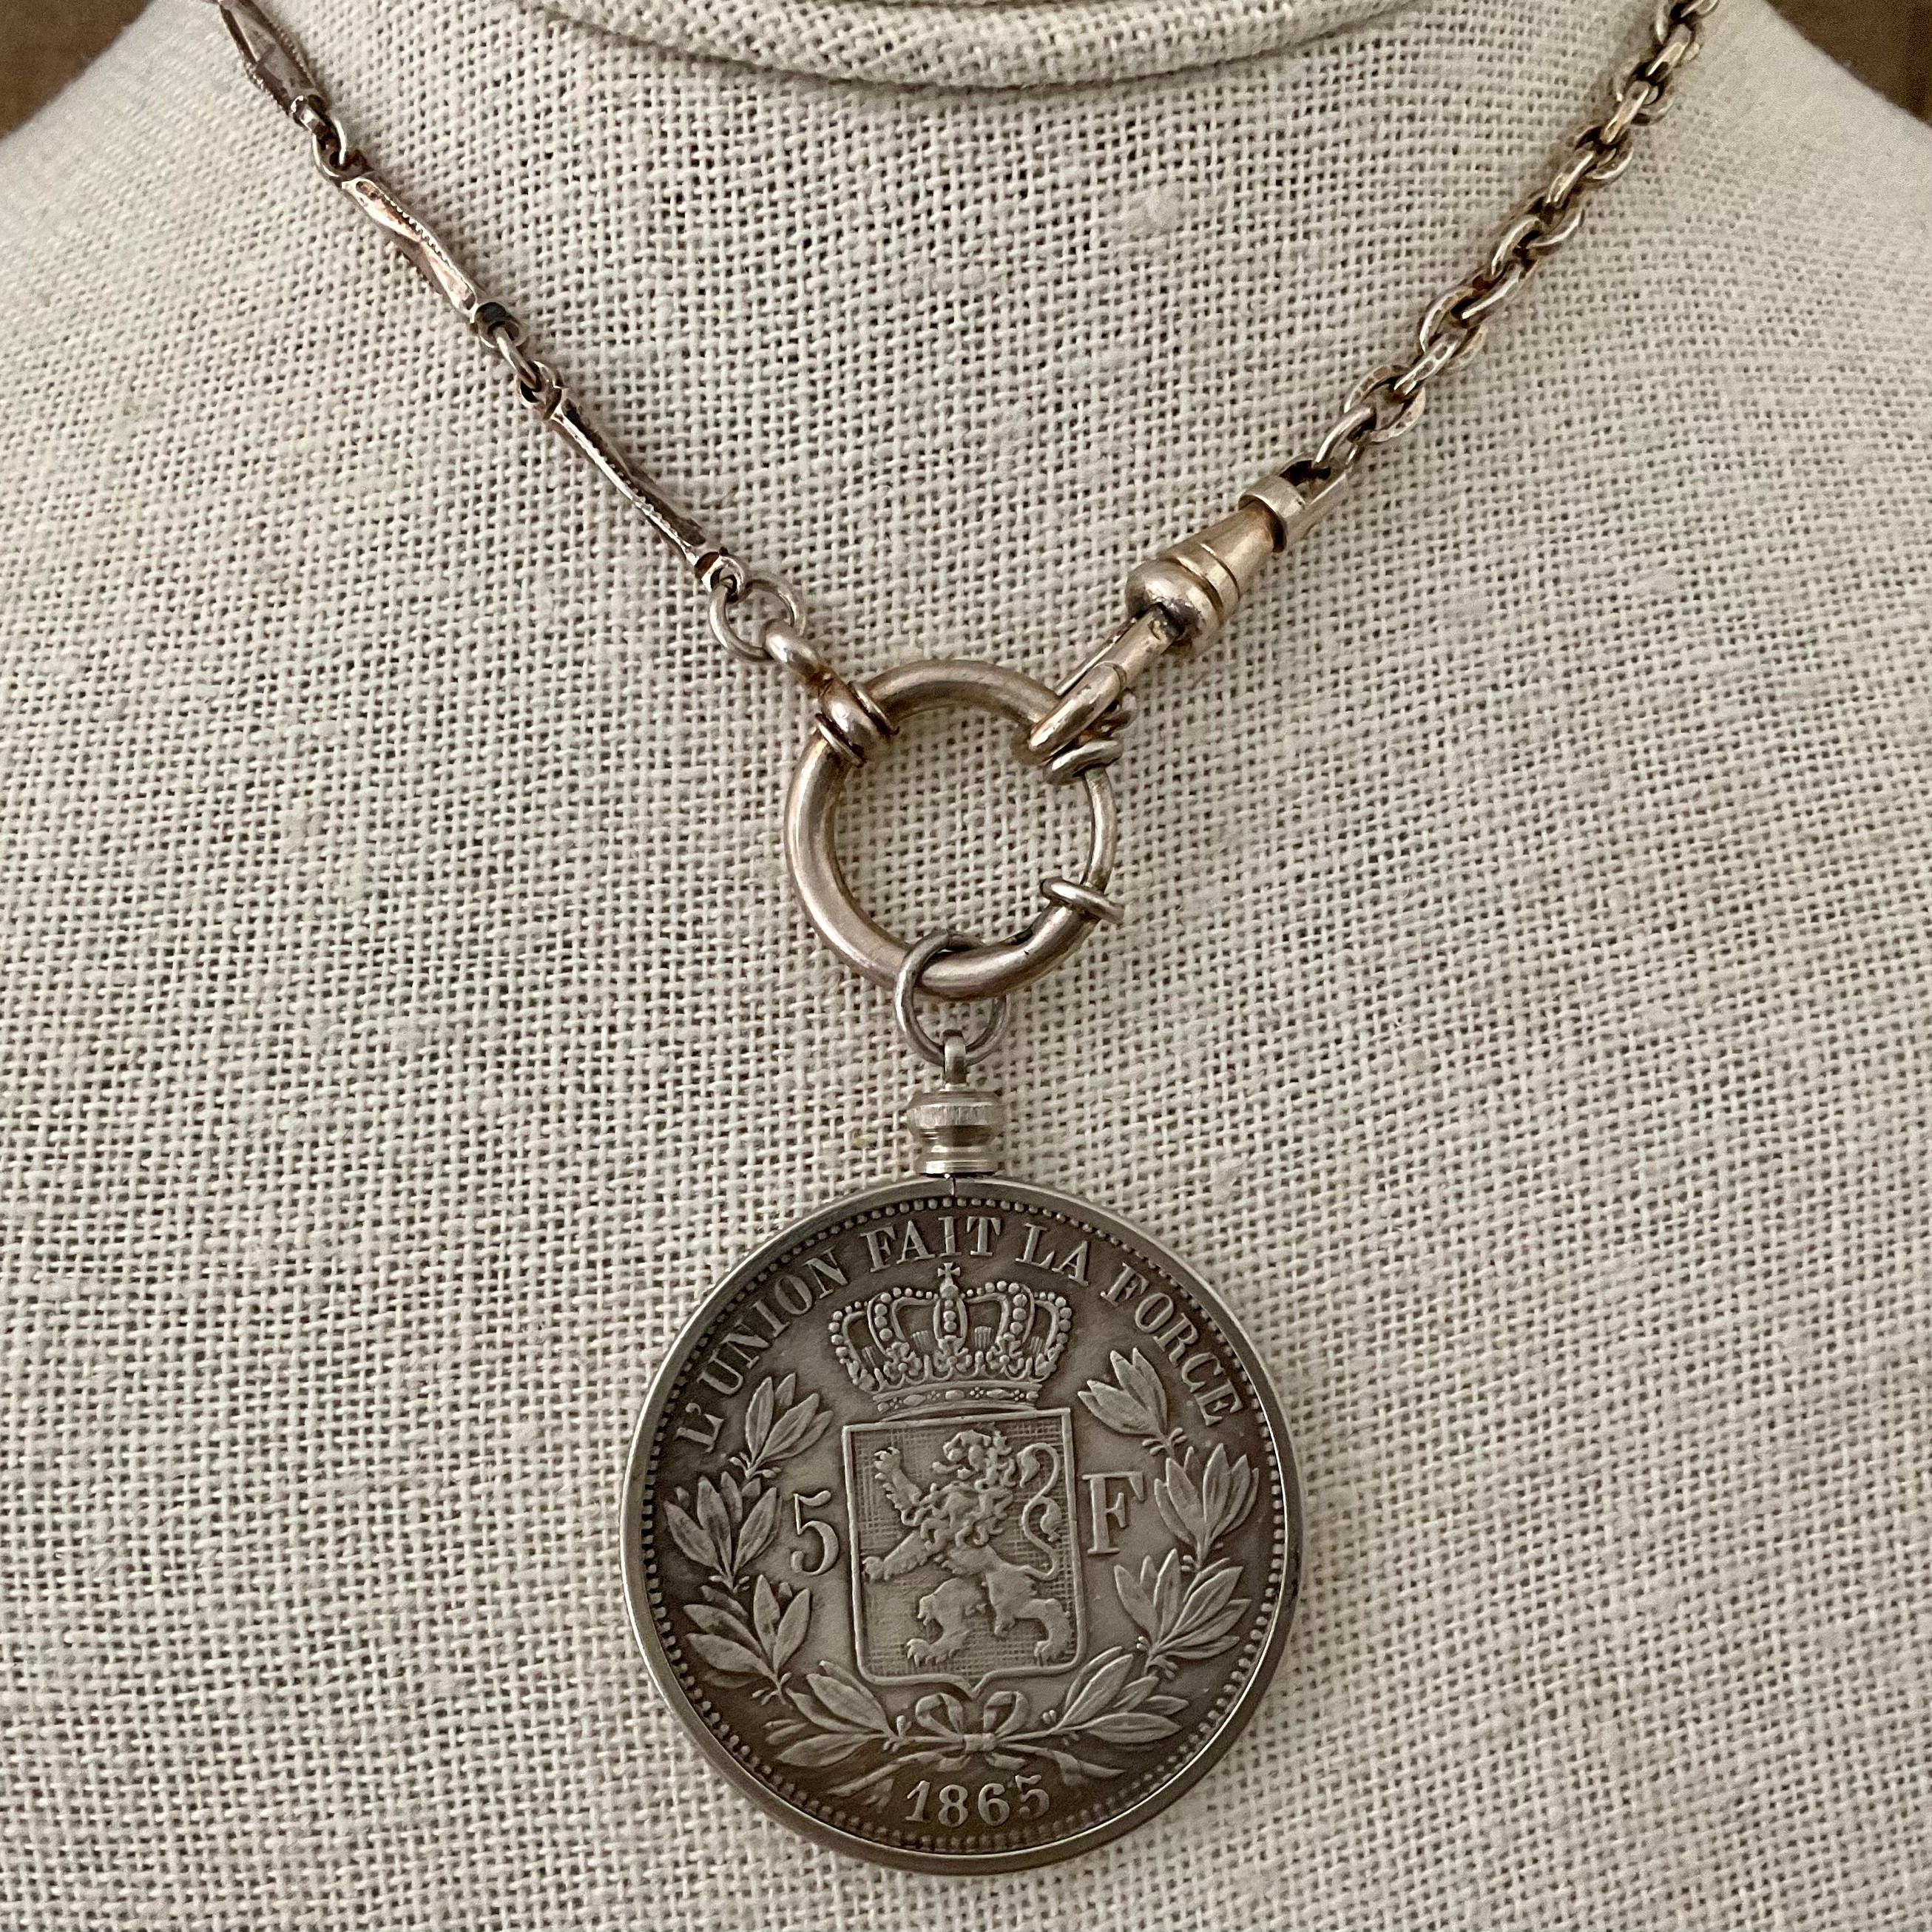 Vintage Sterling Watch Chain with Belgian Coin Circa 1865